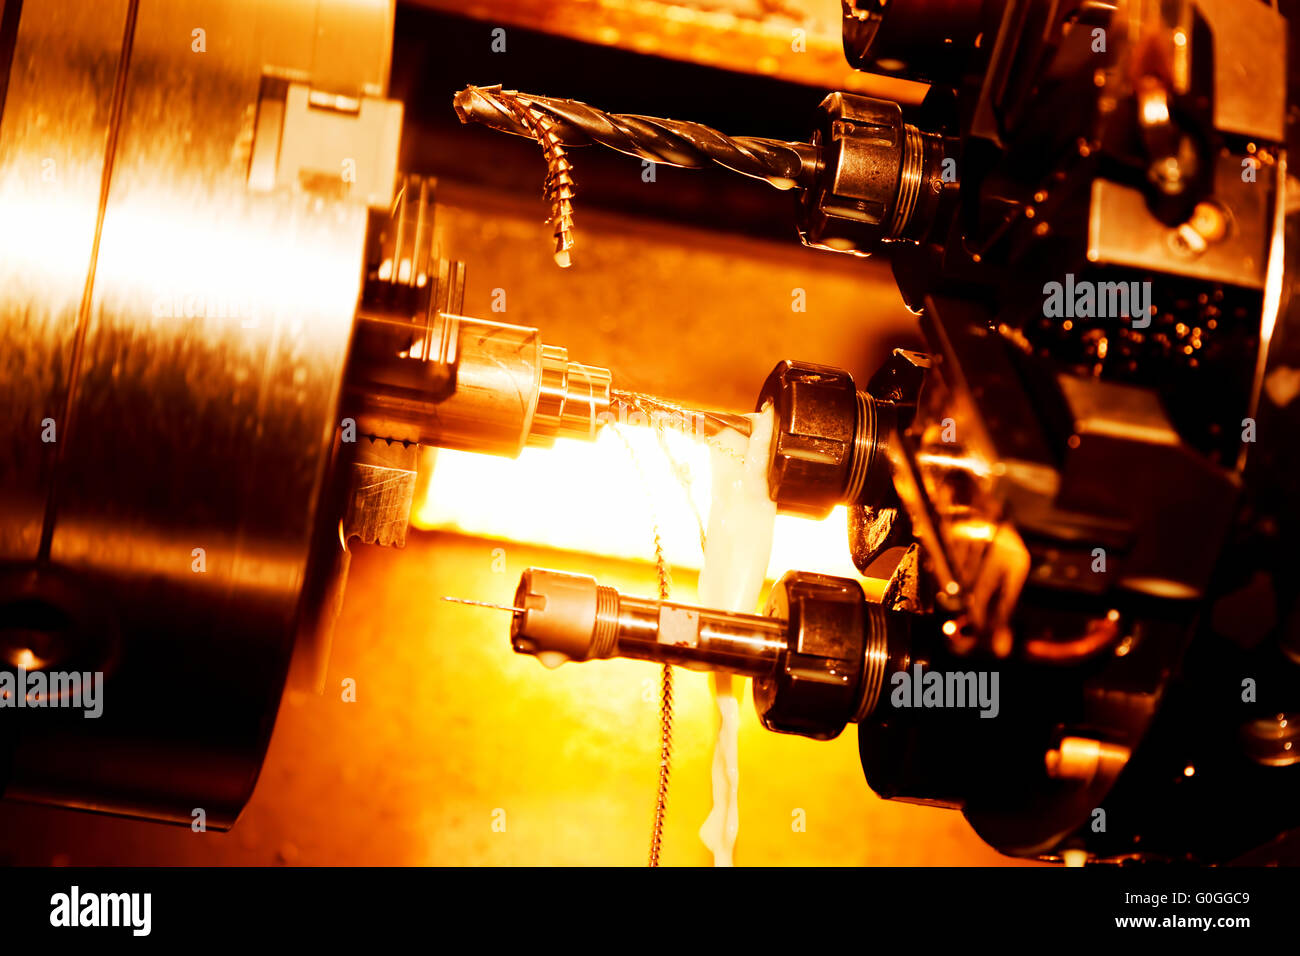 Industrial CNC drilling and boring machine at work Stock Photo